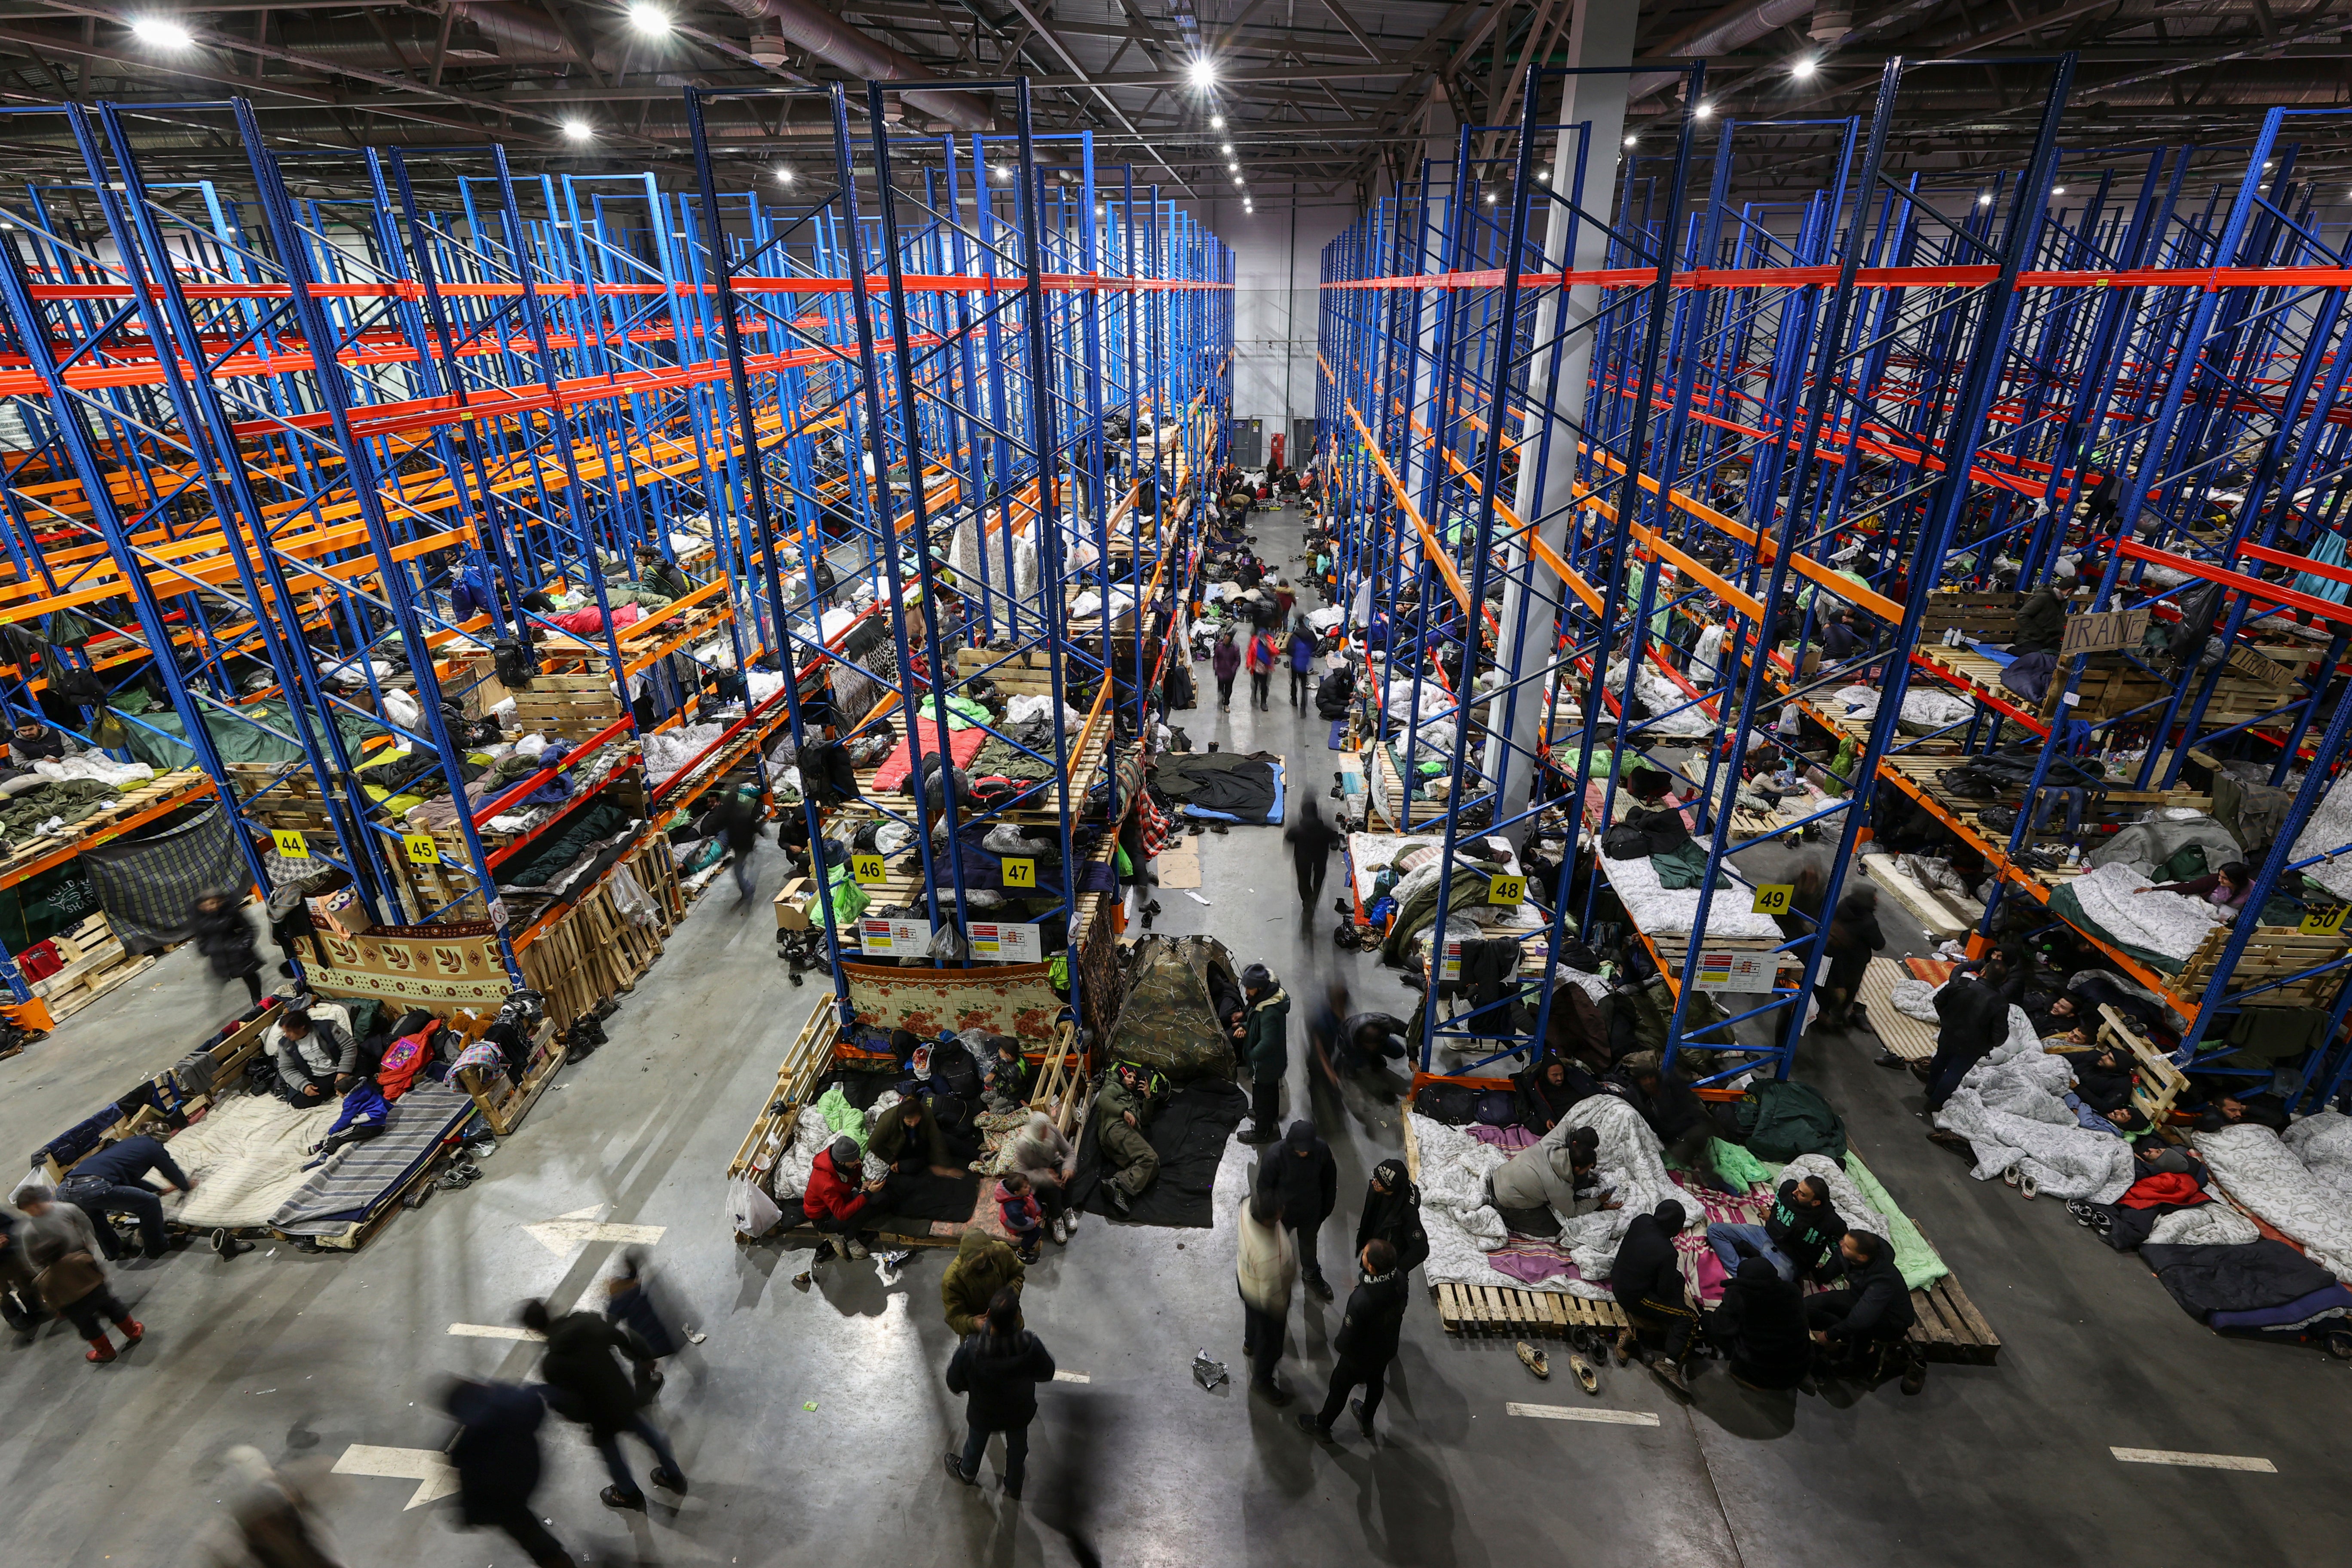 Migrants in a warehouse at the Belarusian-Polish border, in the Grodno region of Belarus